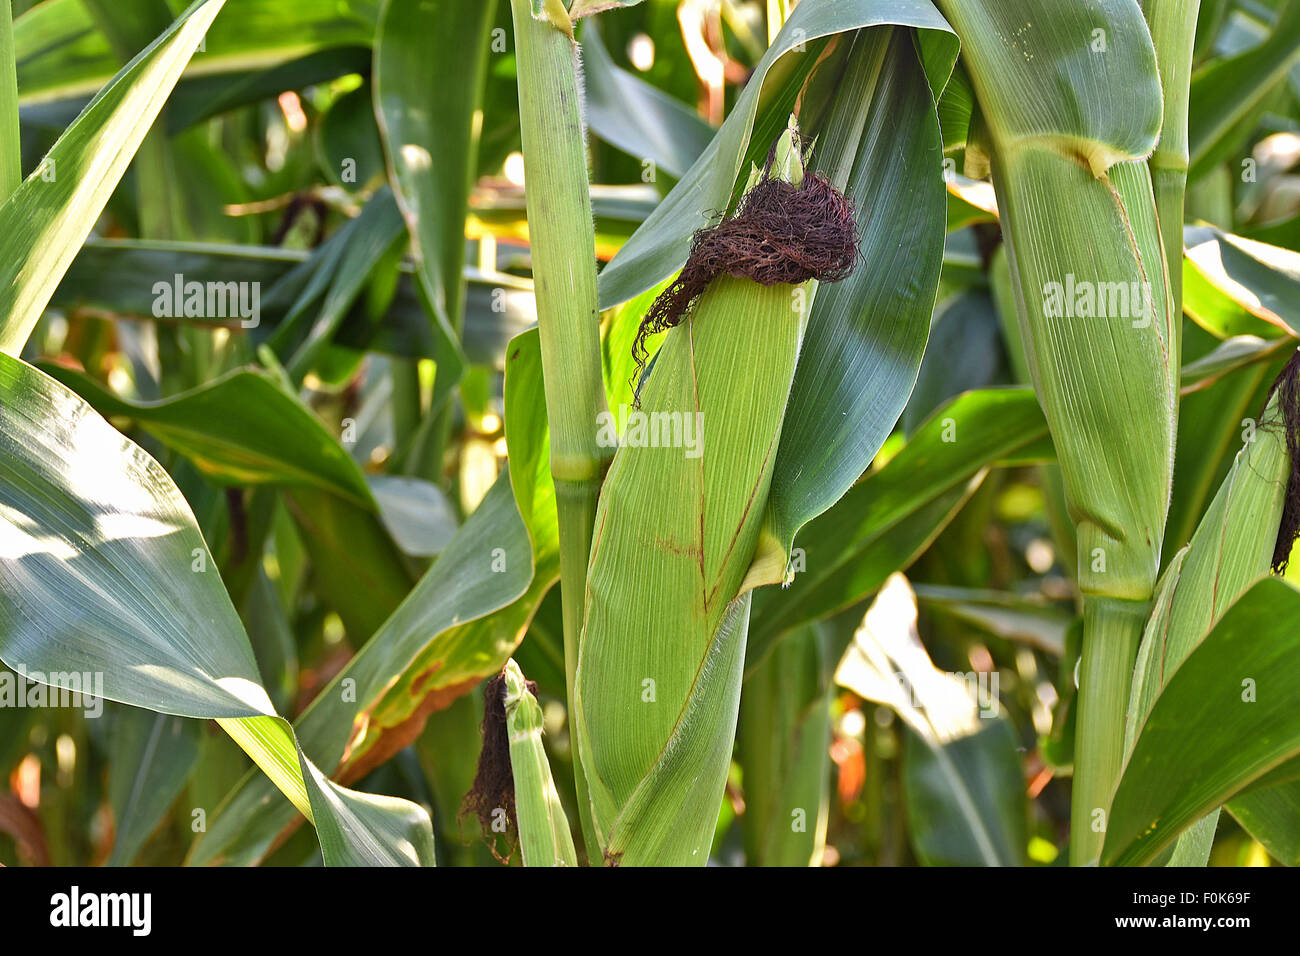 Corn cob growing on corn plant in a rural field dappled with sunlight. Stock Photo